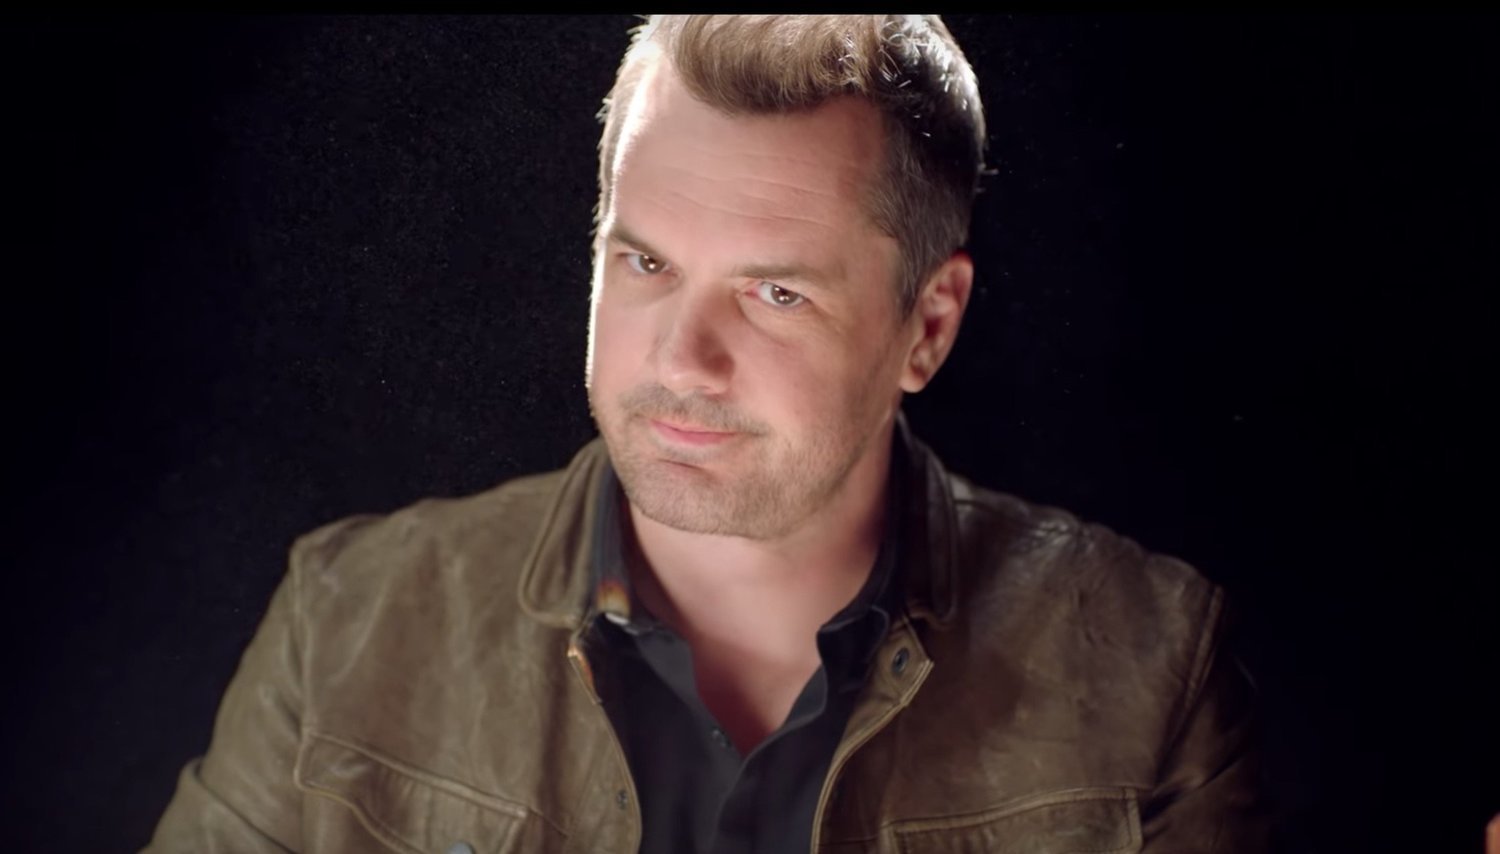 VIDEO Netflix Shares the Official Trailer for Jim Jefferies' Comedy